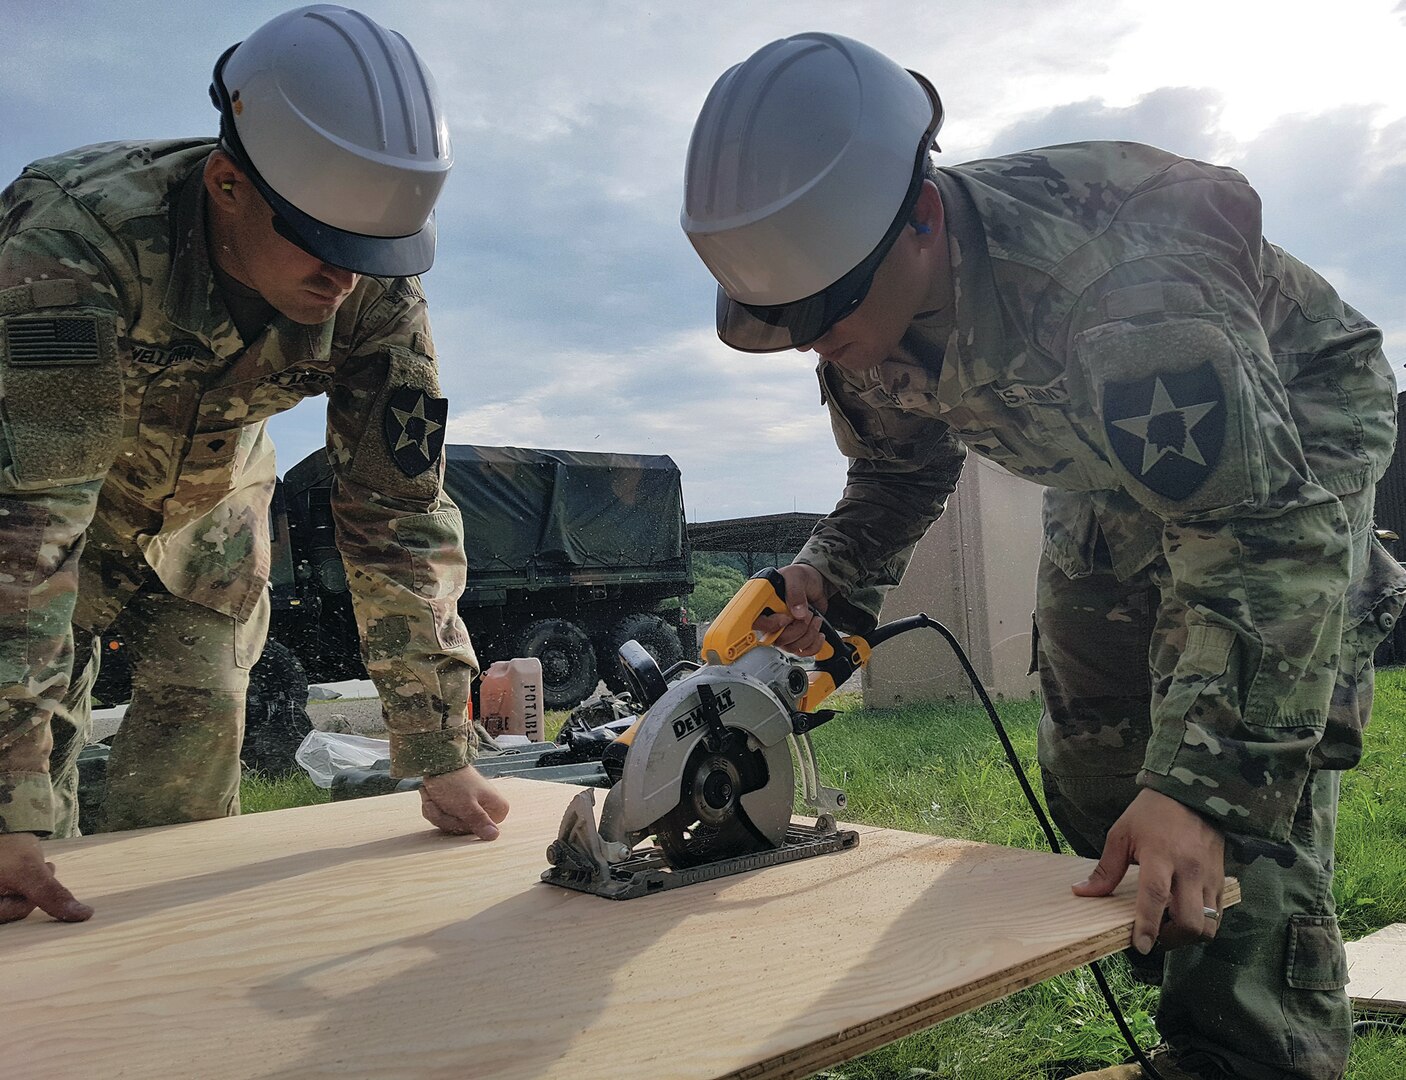 Wolfpack Engineers combine construction with combat skills during Ulchi Freedom Guardian